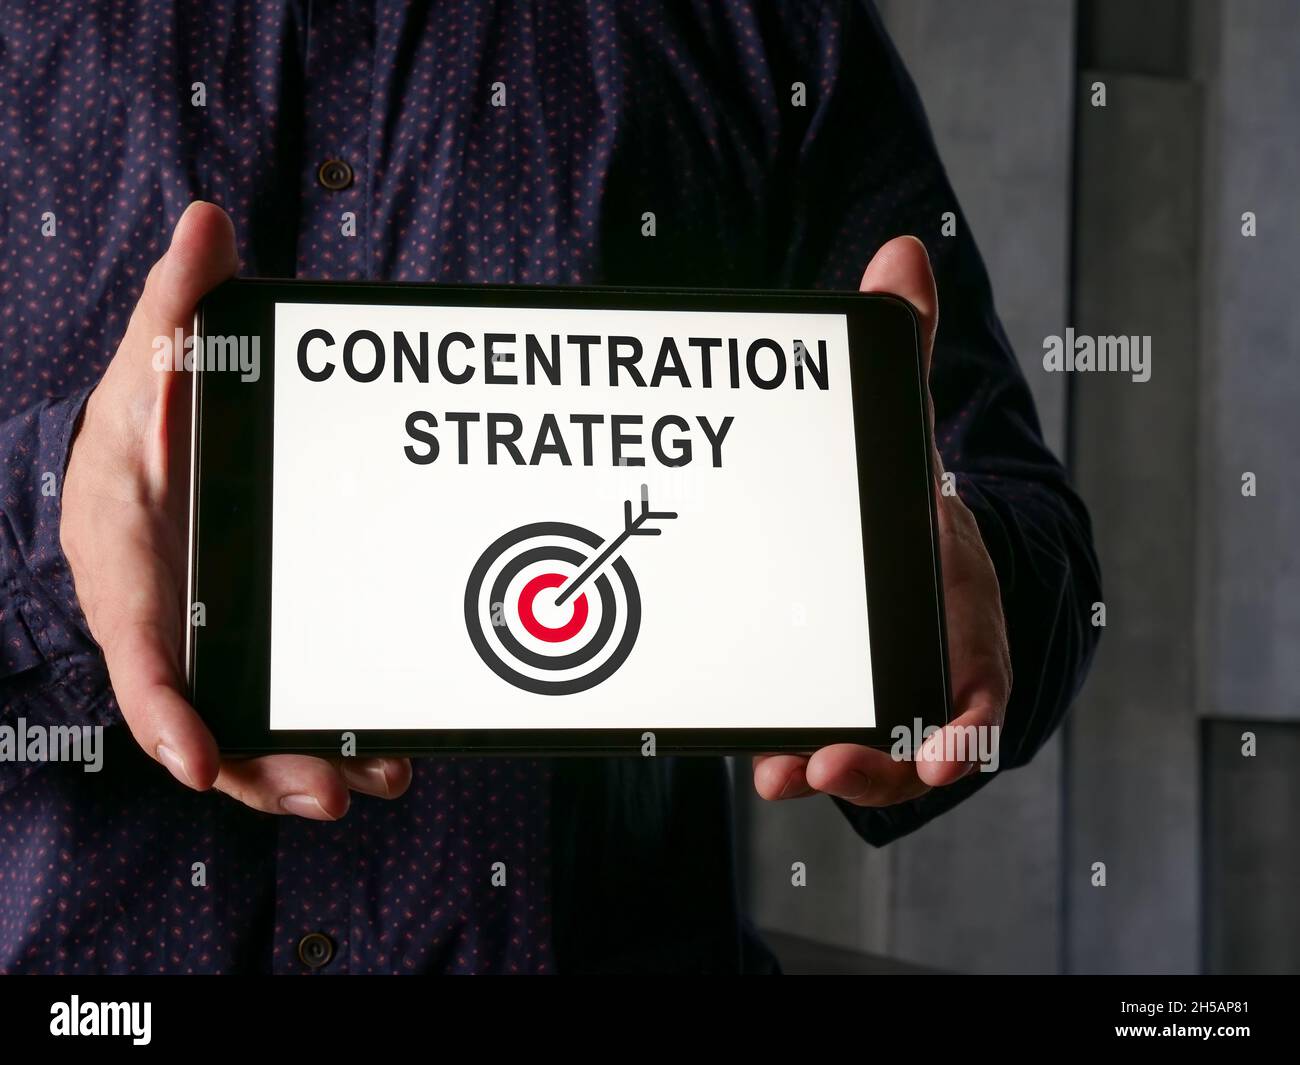 Concentration strategy concept. Man shows tablet with inscription. Stock Photo